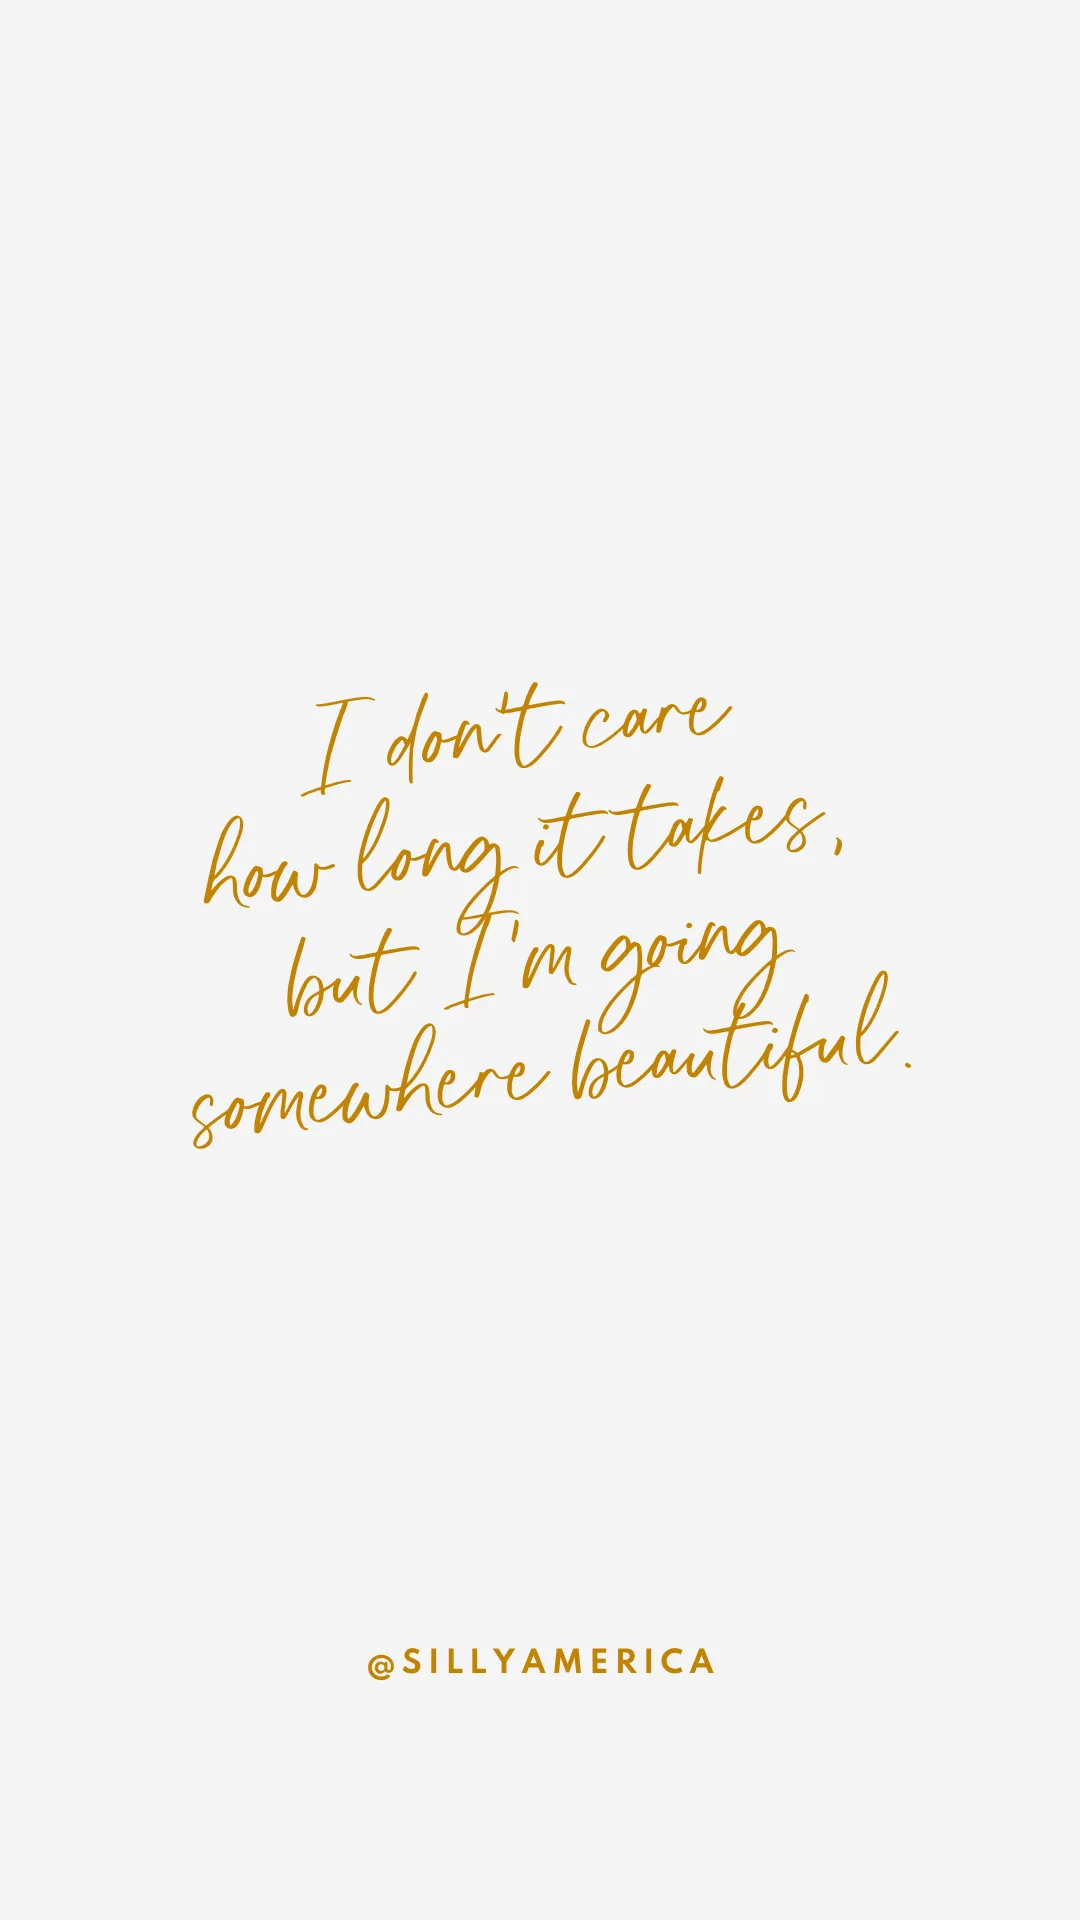 I don’t care how long it takes, but I’m going somewhere beautiful. - Road Trip Captions for Instagram